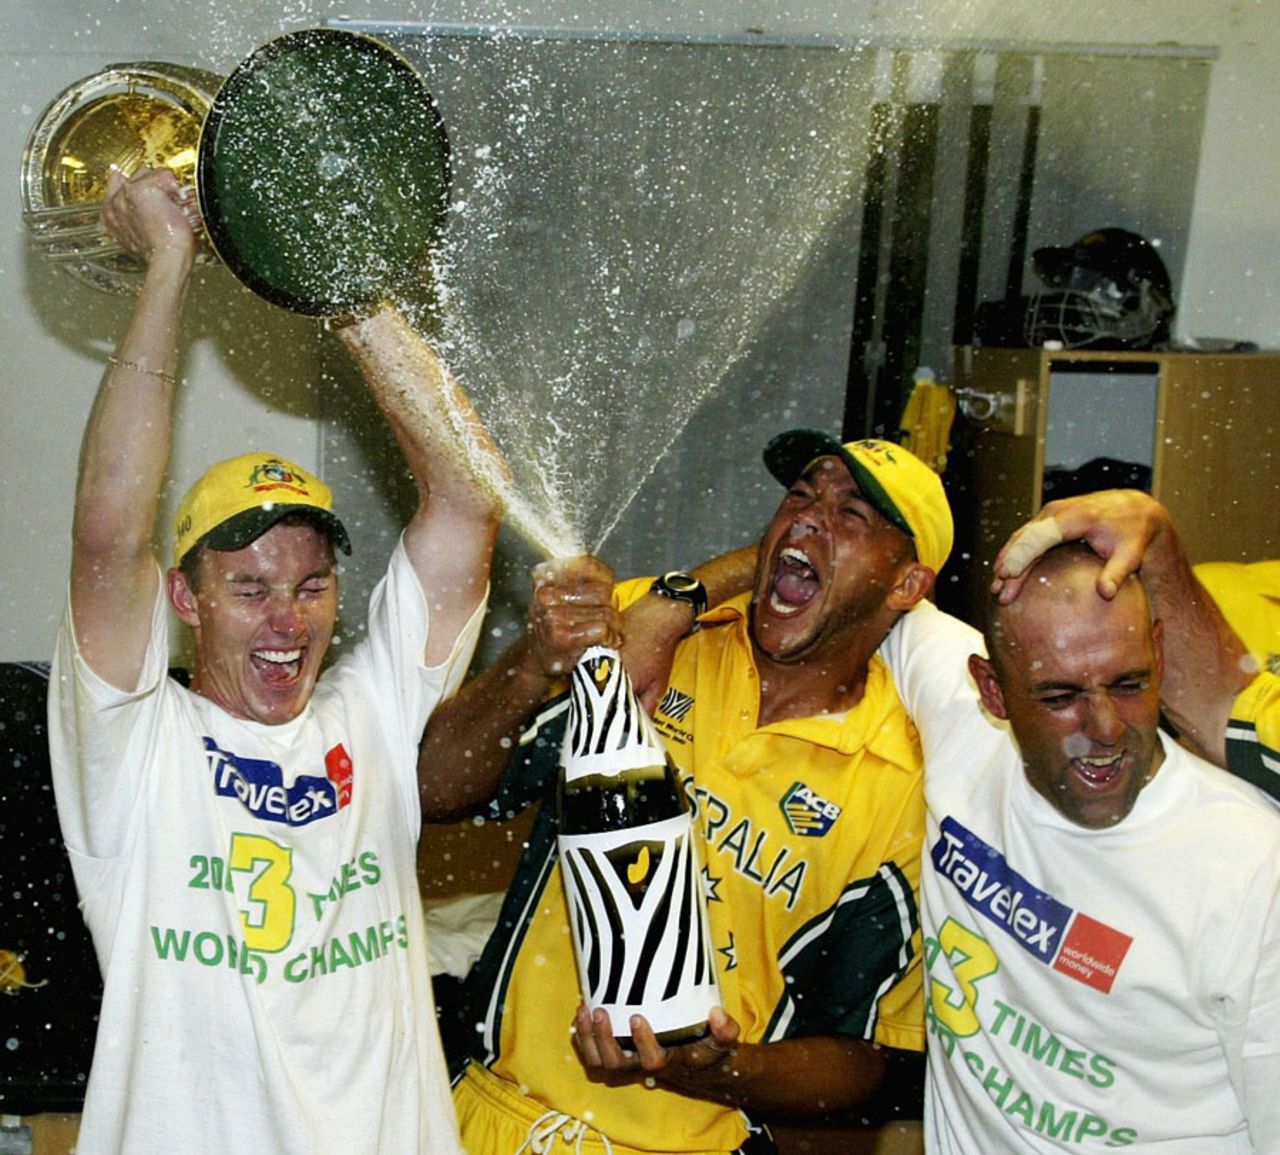 Brett Lee, Andrew Symonds and Darren Lehmann with the trophy, World Cup, 2003 - Australia v India at Centurion, 15 February 2003